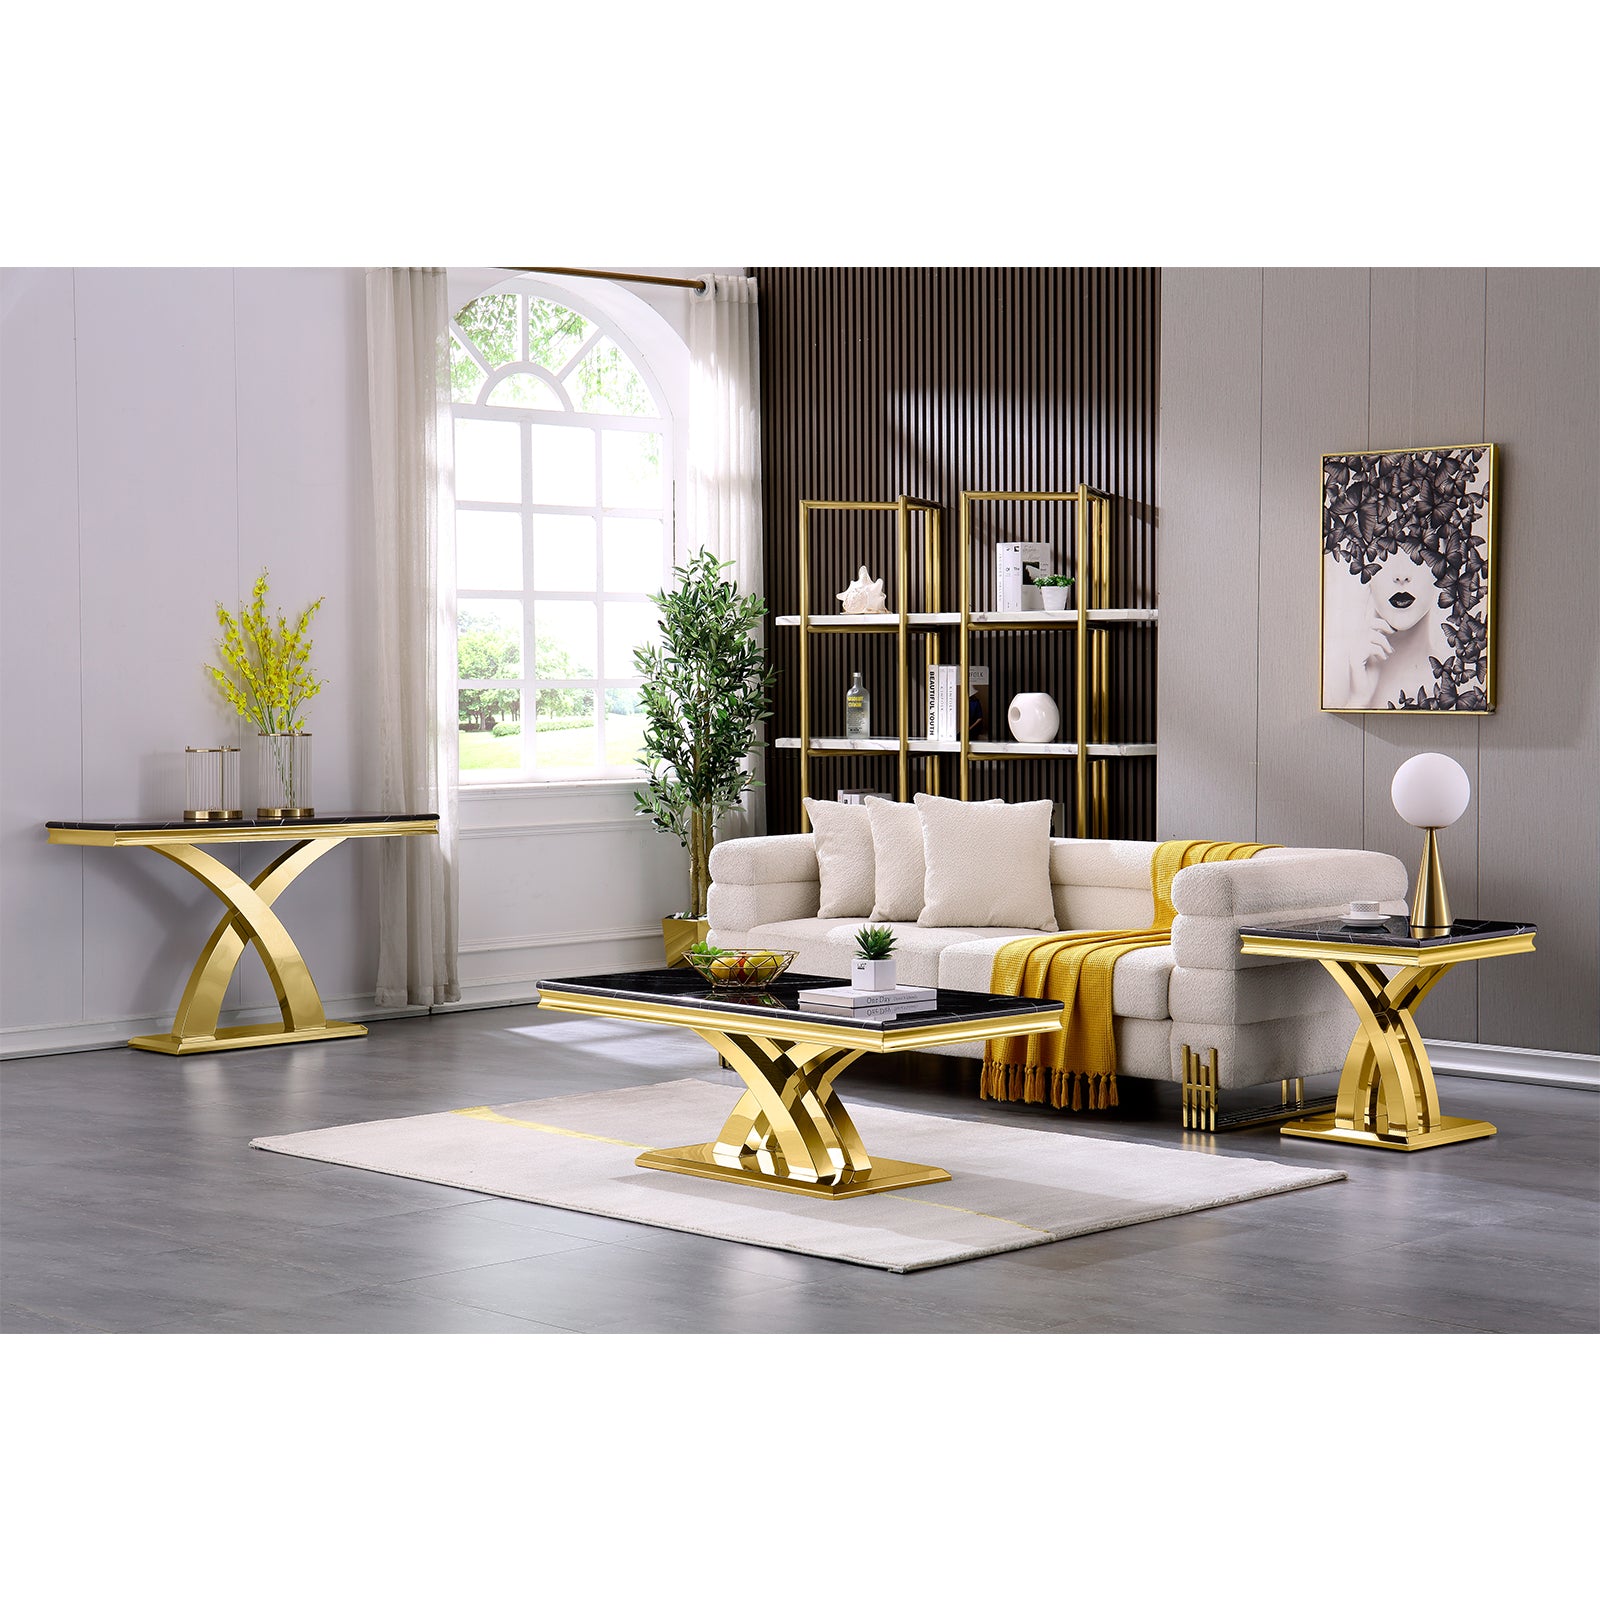 The AUZ 48" Gold Rectangle Coffee Table: Adding Luxury to Your Living Room